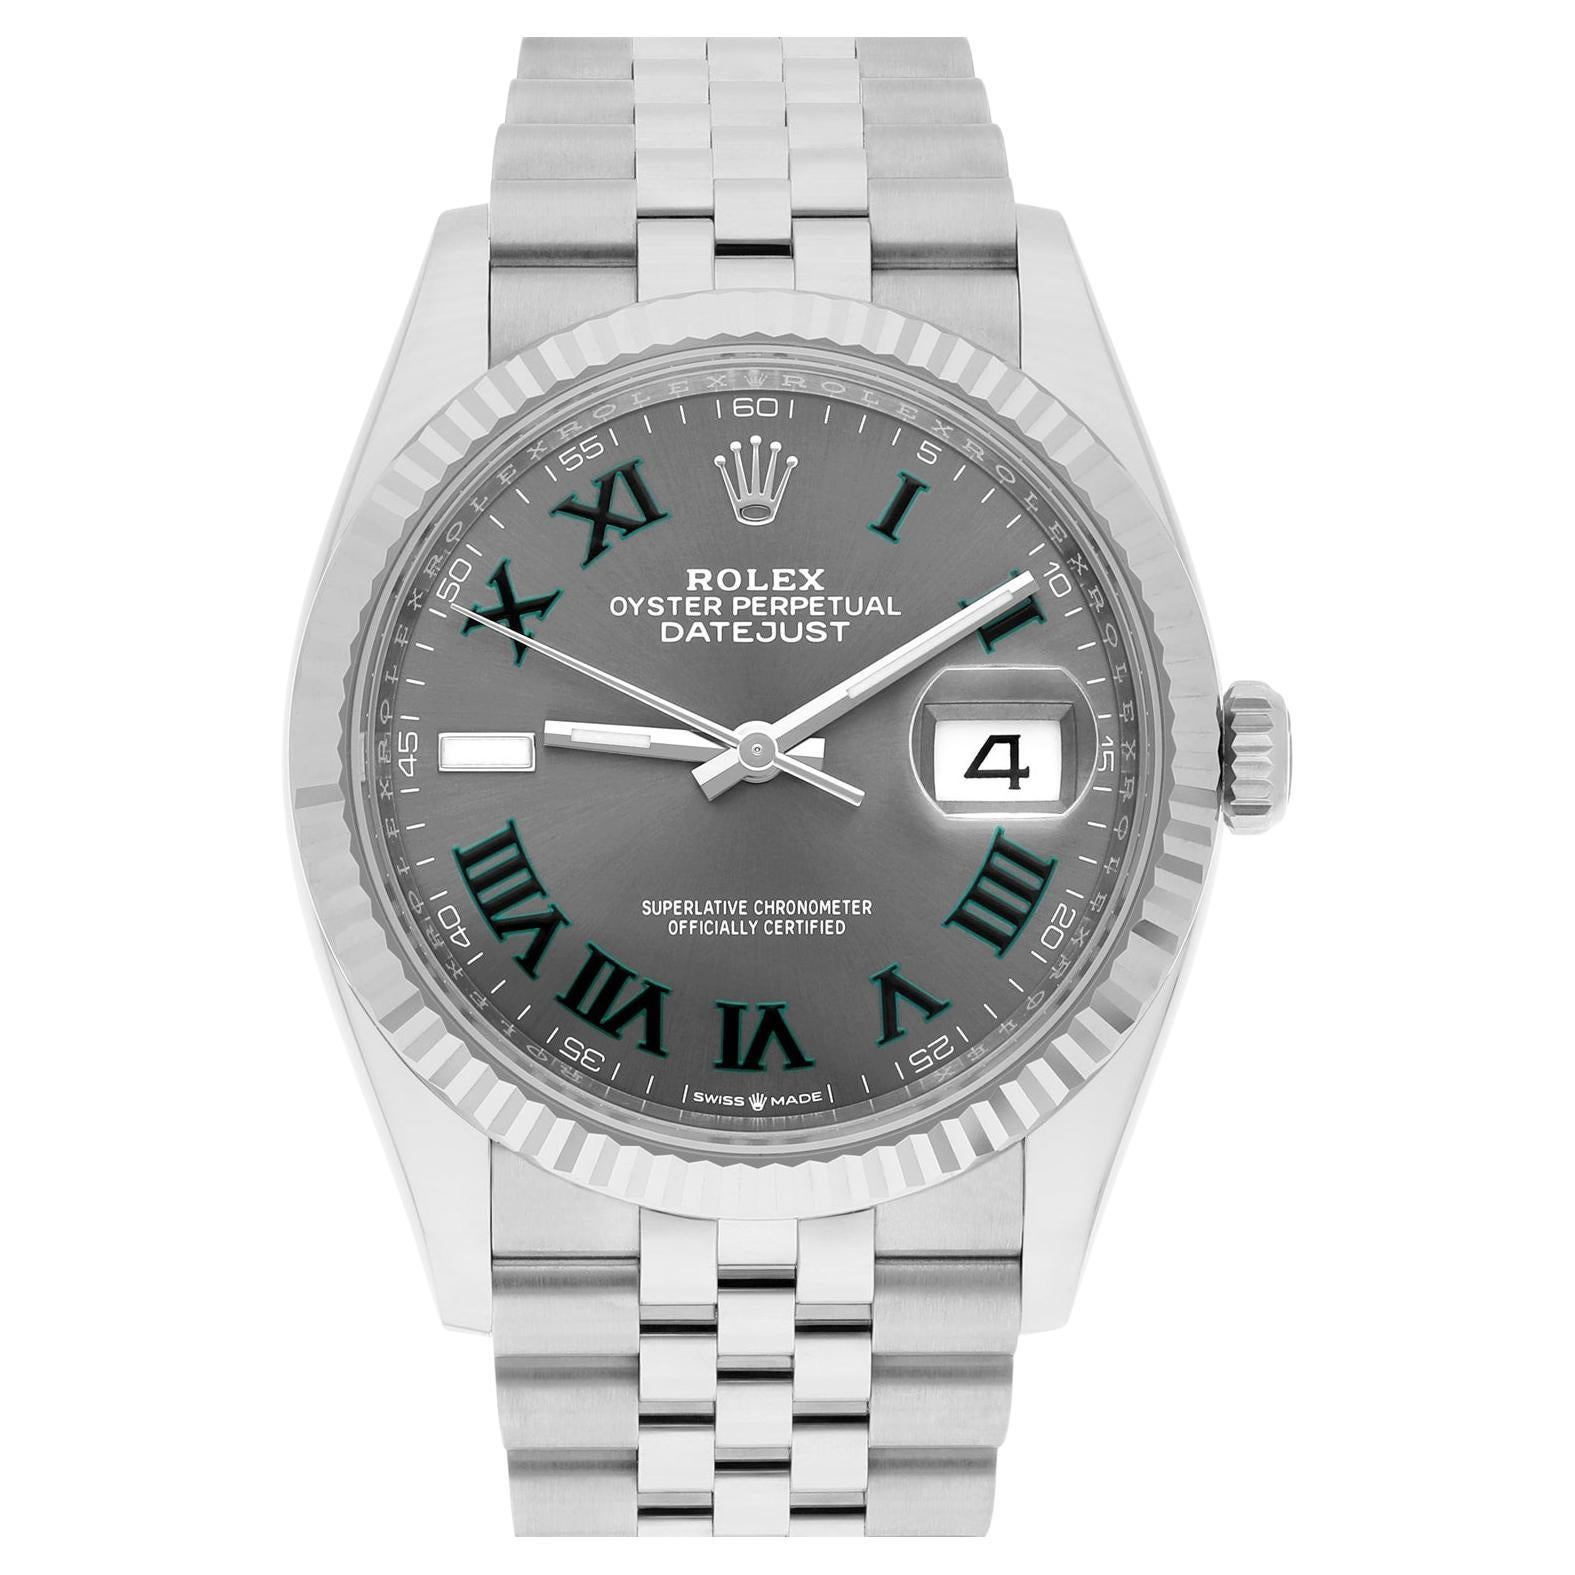 How do you wind up a Rolex watch?